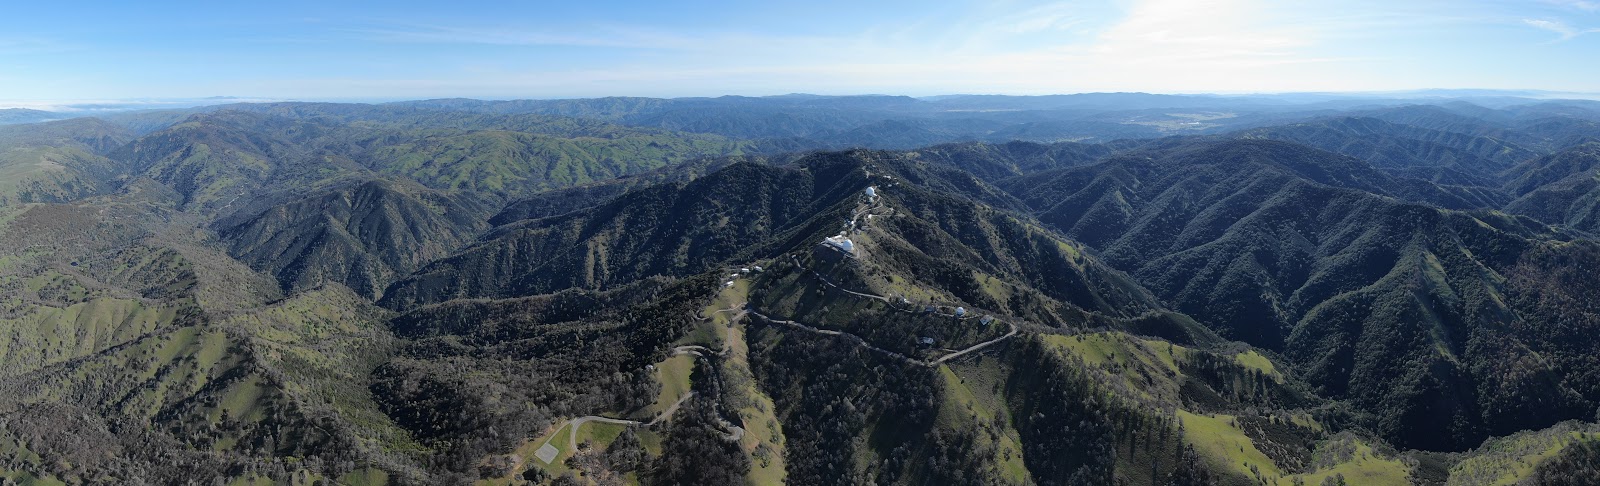 Amgen Tour of California - Cycling Mt. Hamilton - Lick Observatory aerial drone photo of observatories and road - included more than any other climb in the tour of california